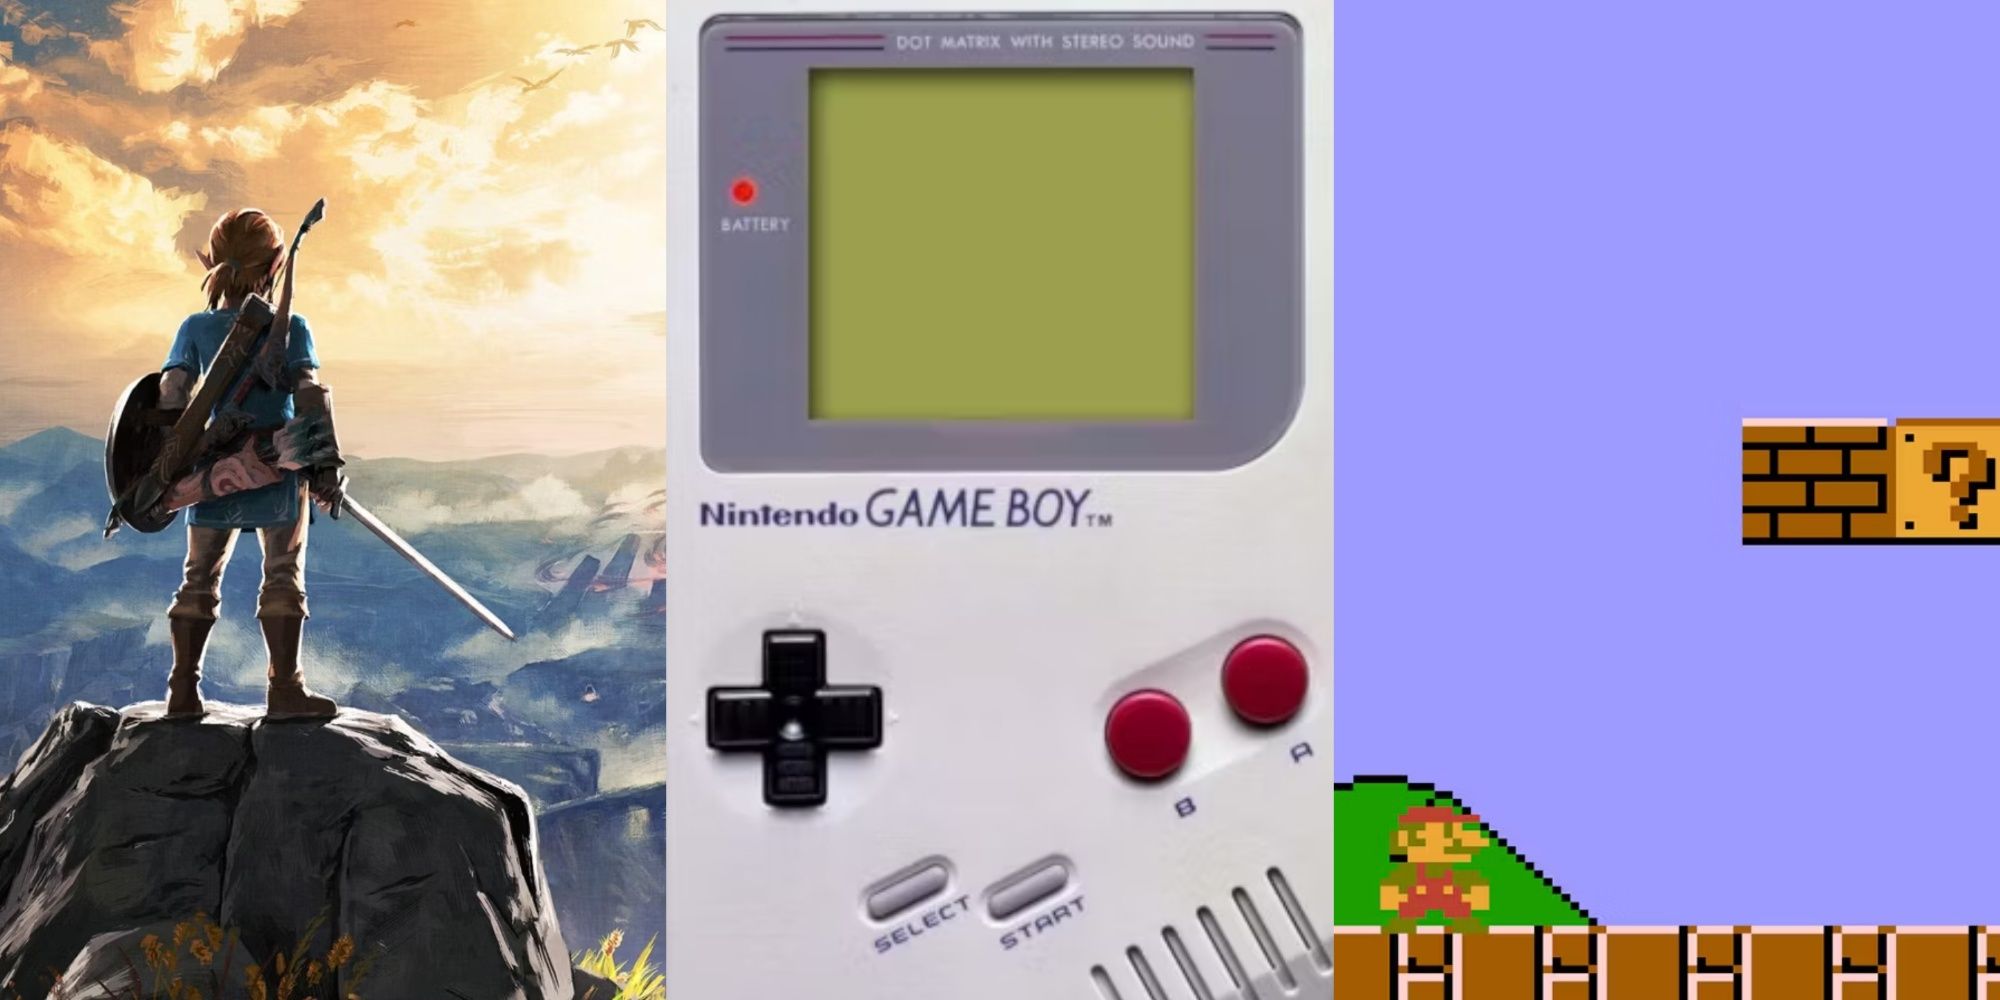 Split images of Breath of the Wild, a Game Boy, and Super Mario Bros